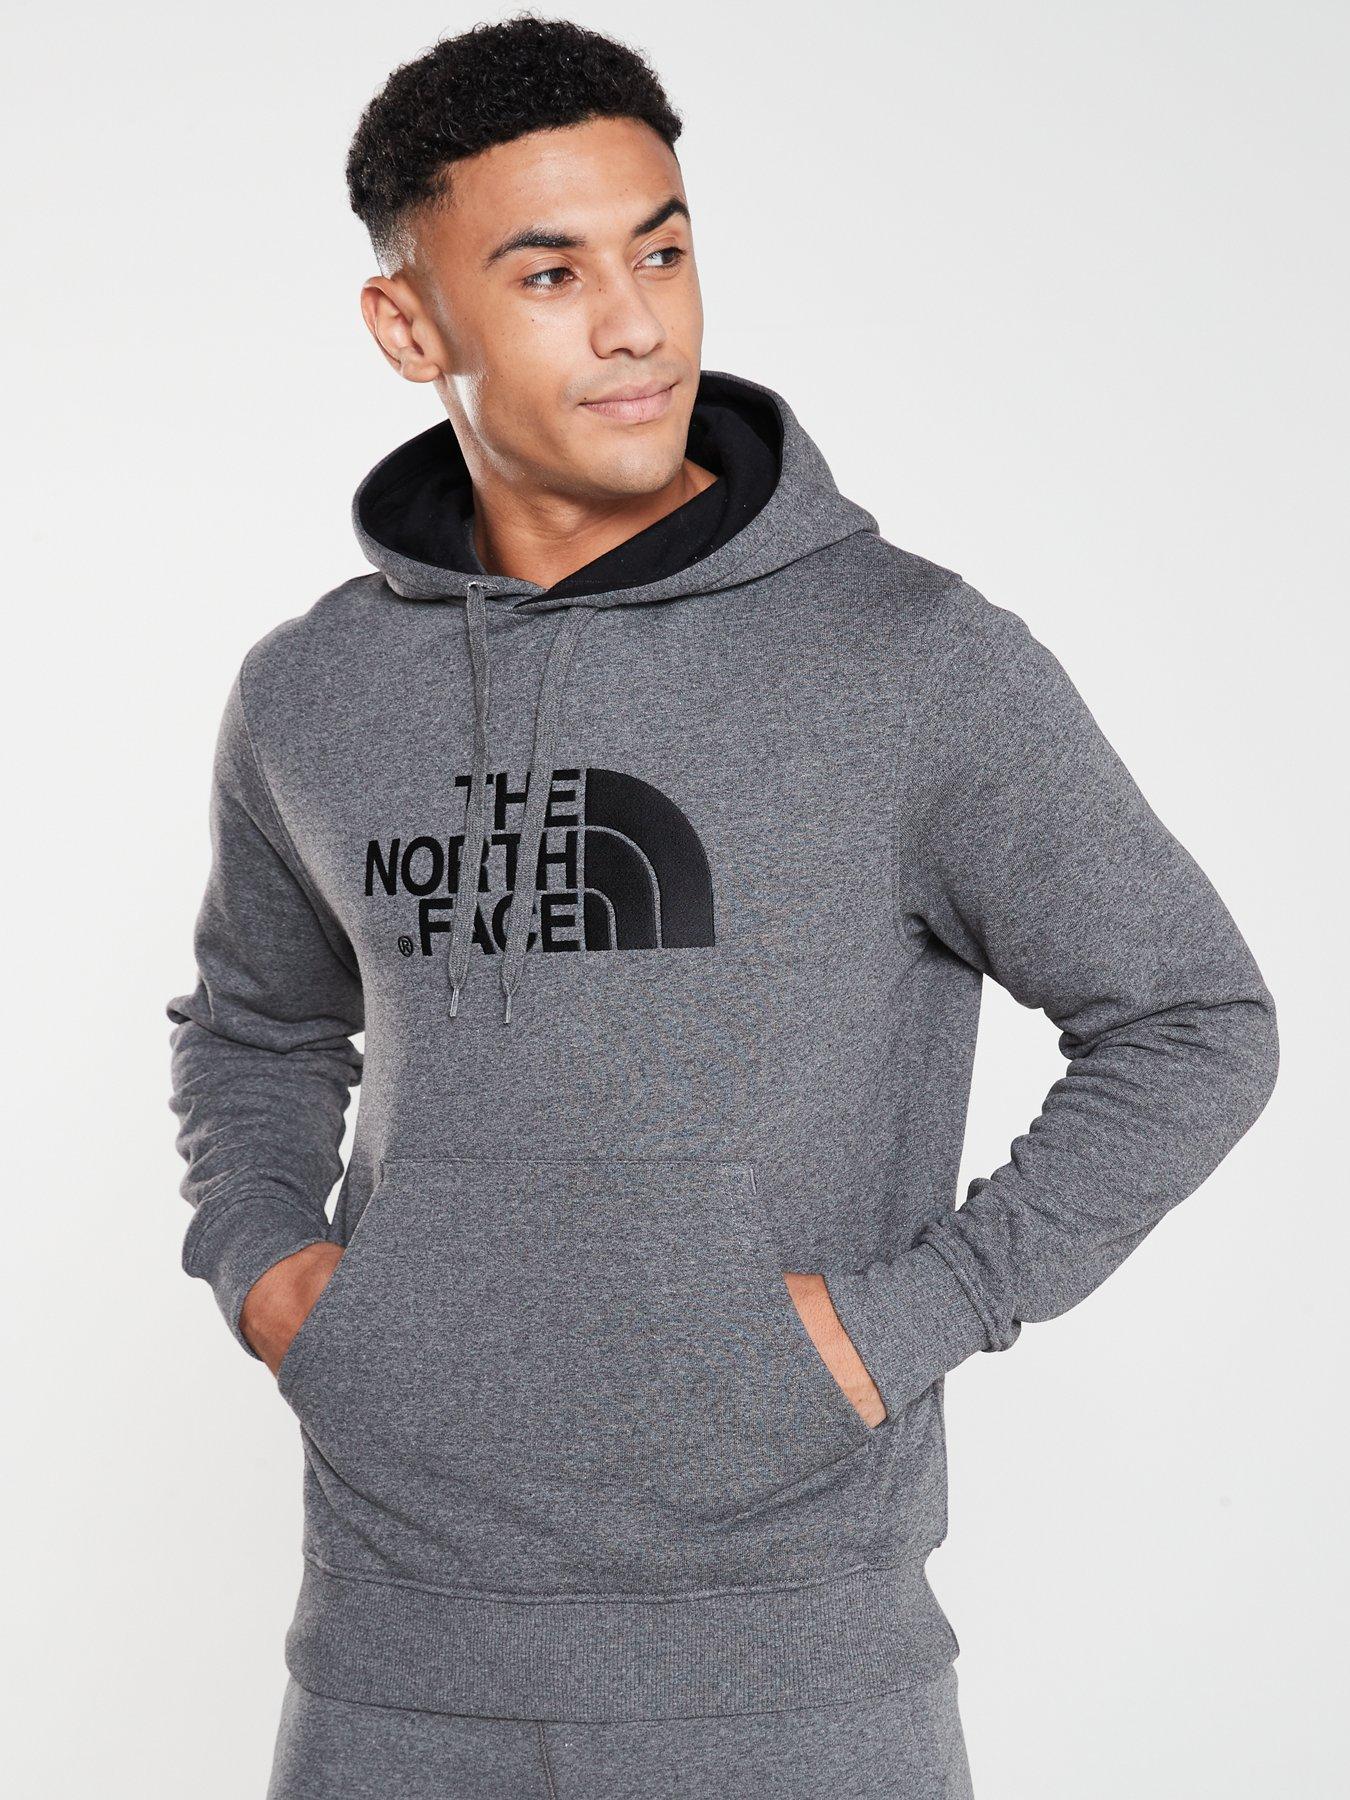 north face tracksuit grey mens